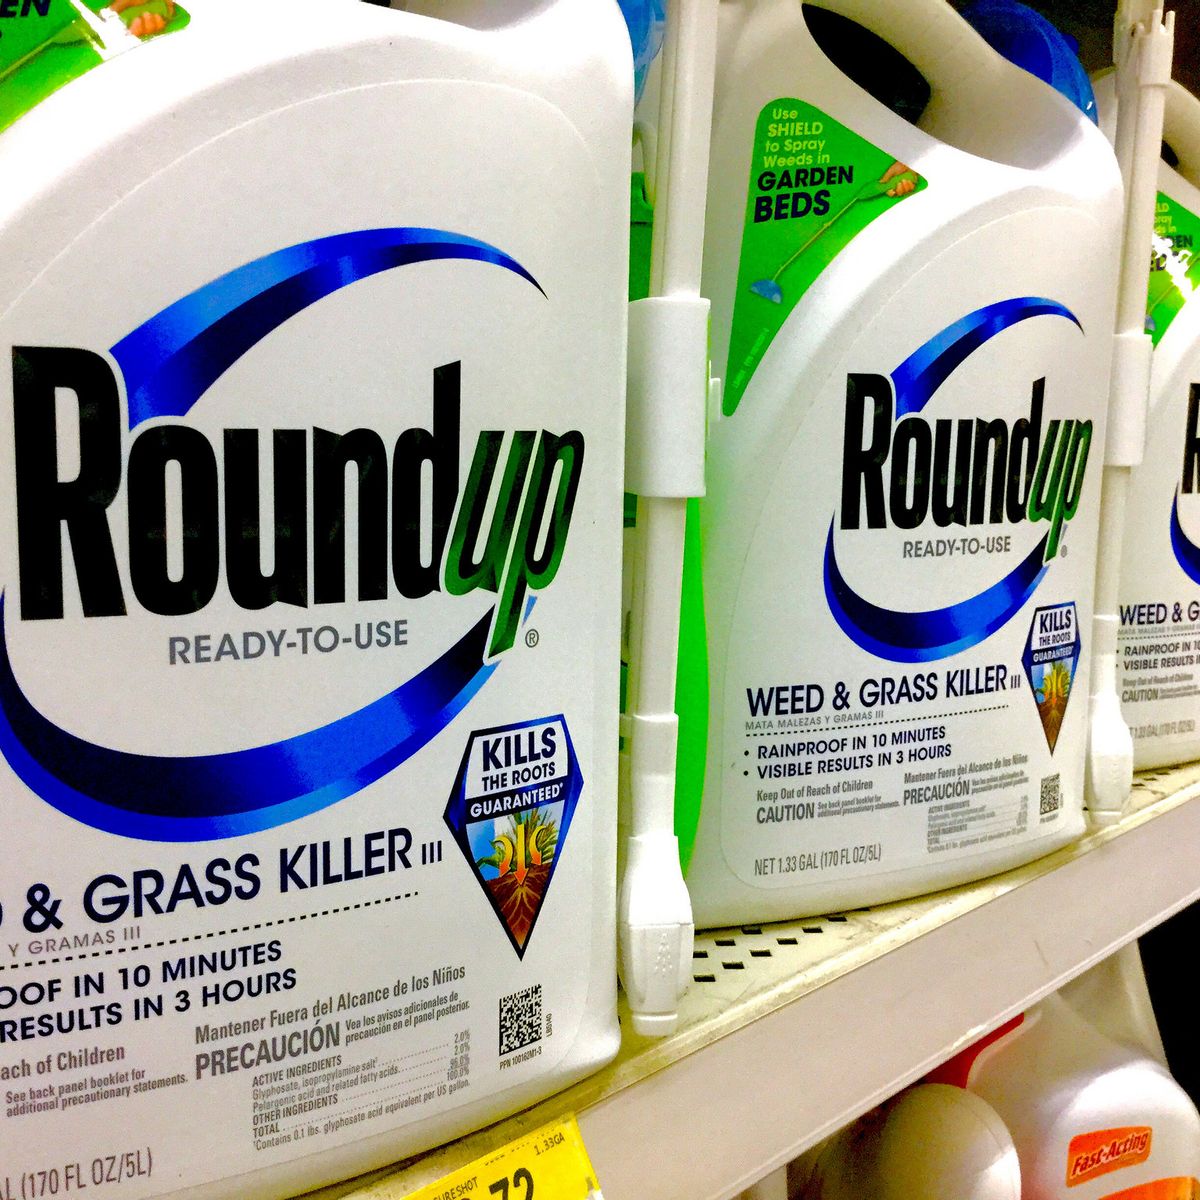 10 more years for glyphosate - What the agent is all about